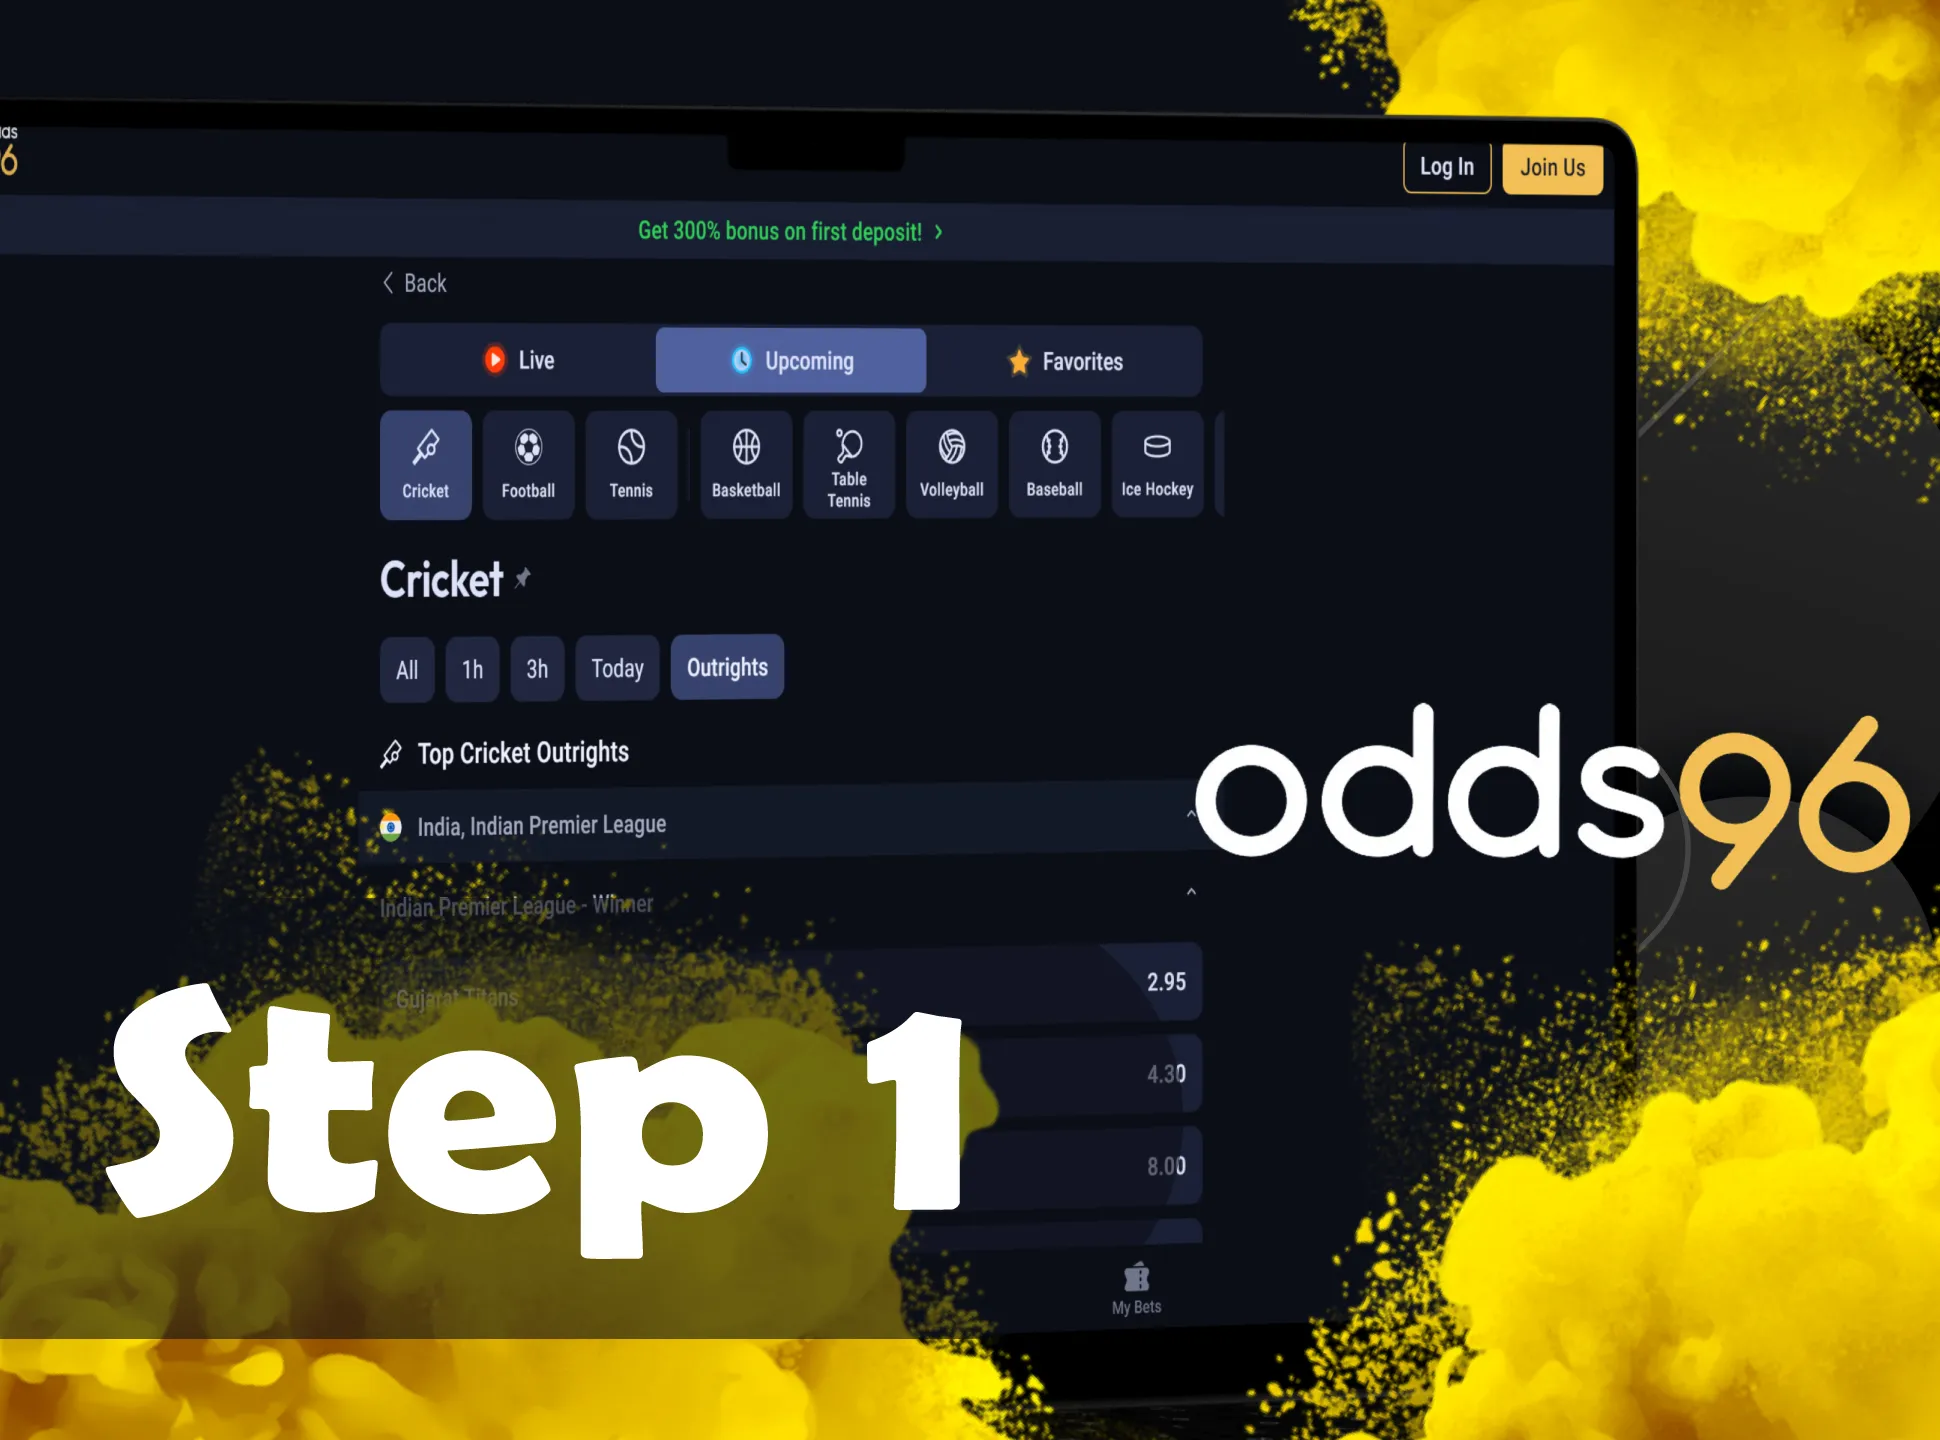 Enter on the Odds96 main page.